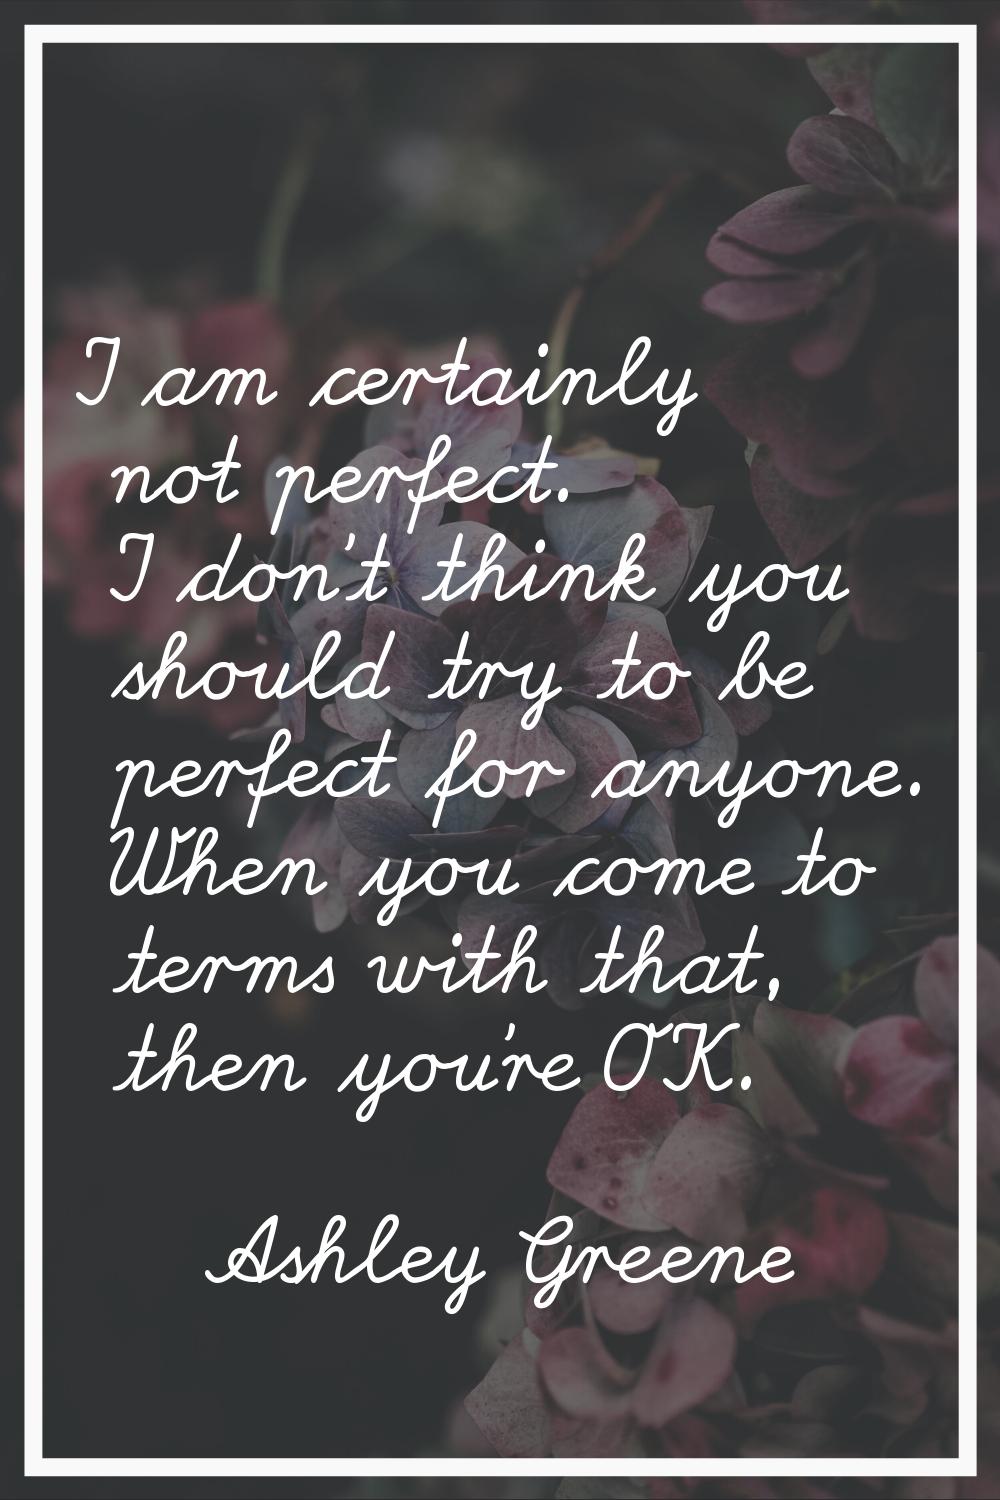 I am certainly not perfect. I don't think you should try to be perfect for anyone. When you come to